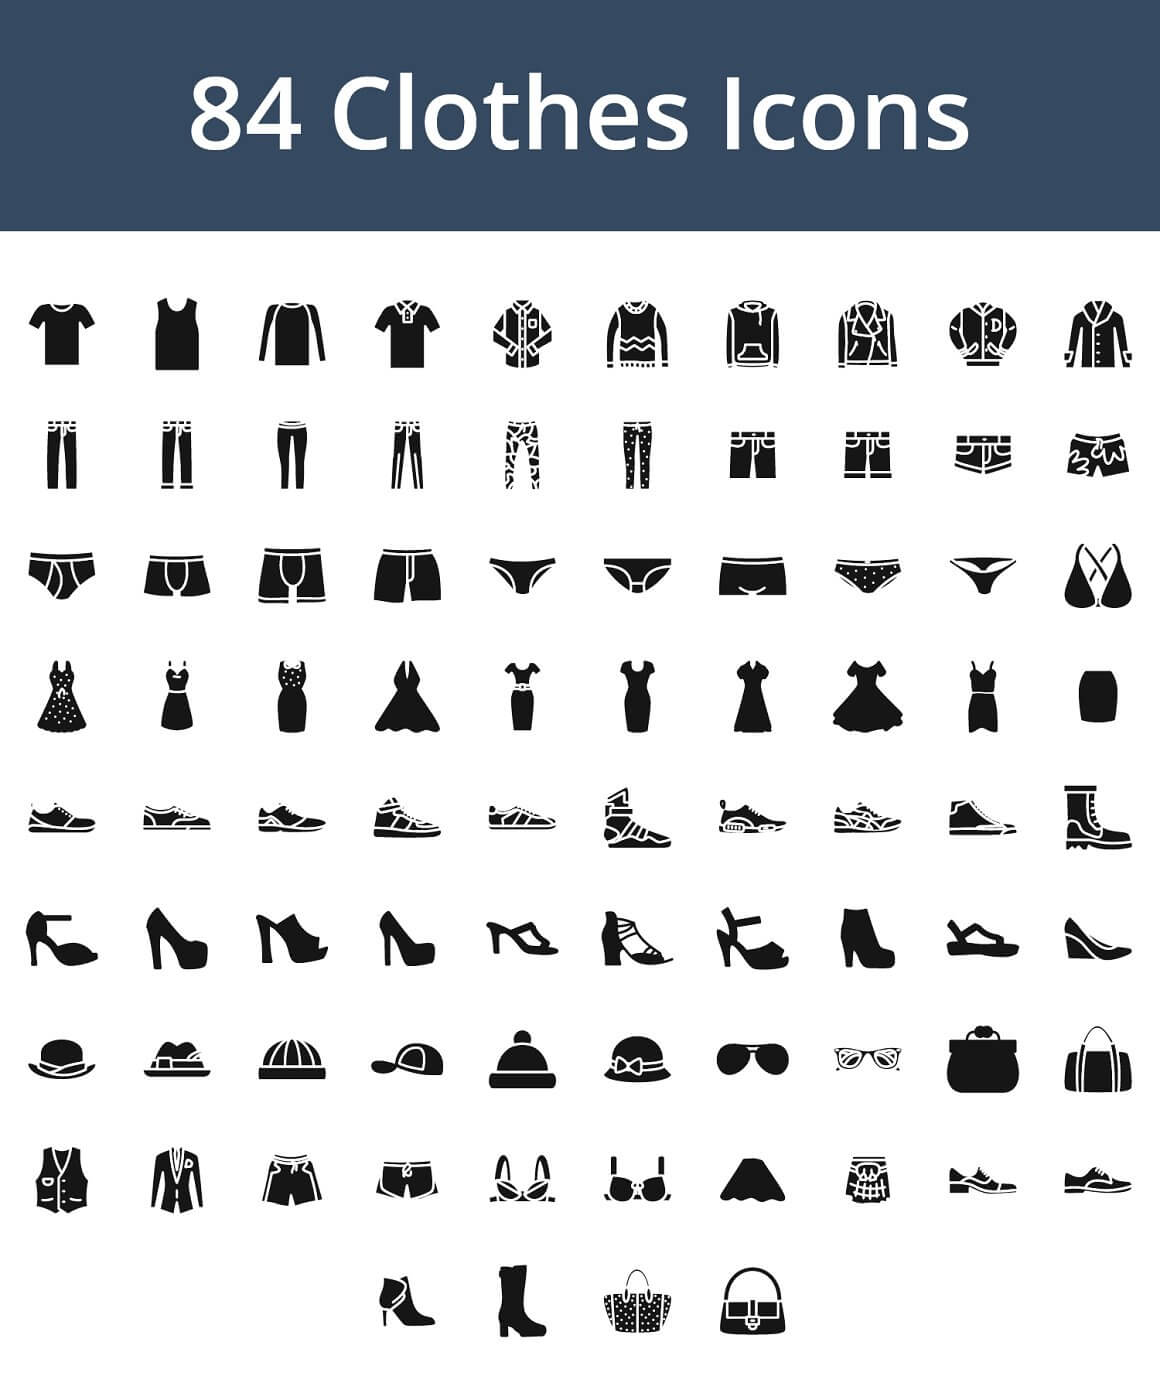 84 Clothes Icons.